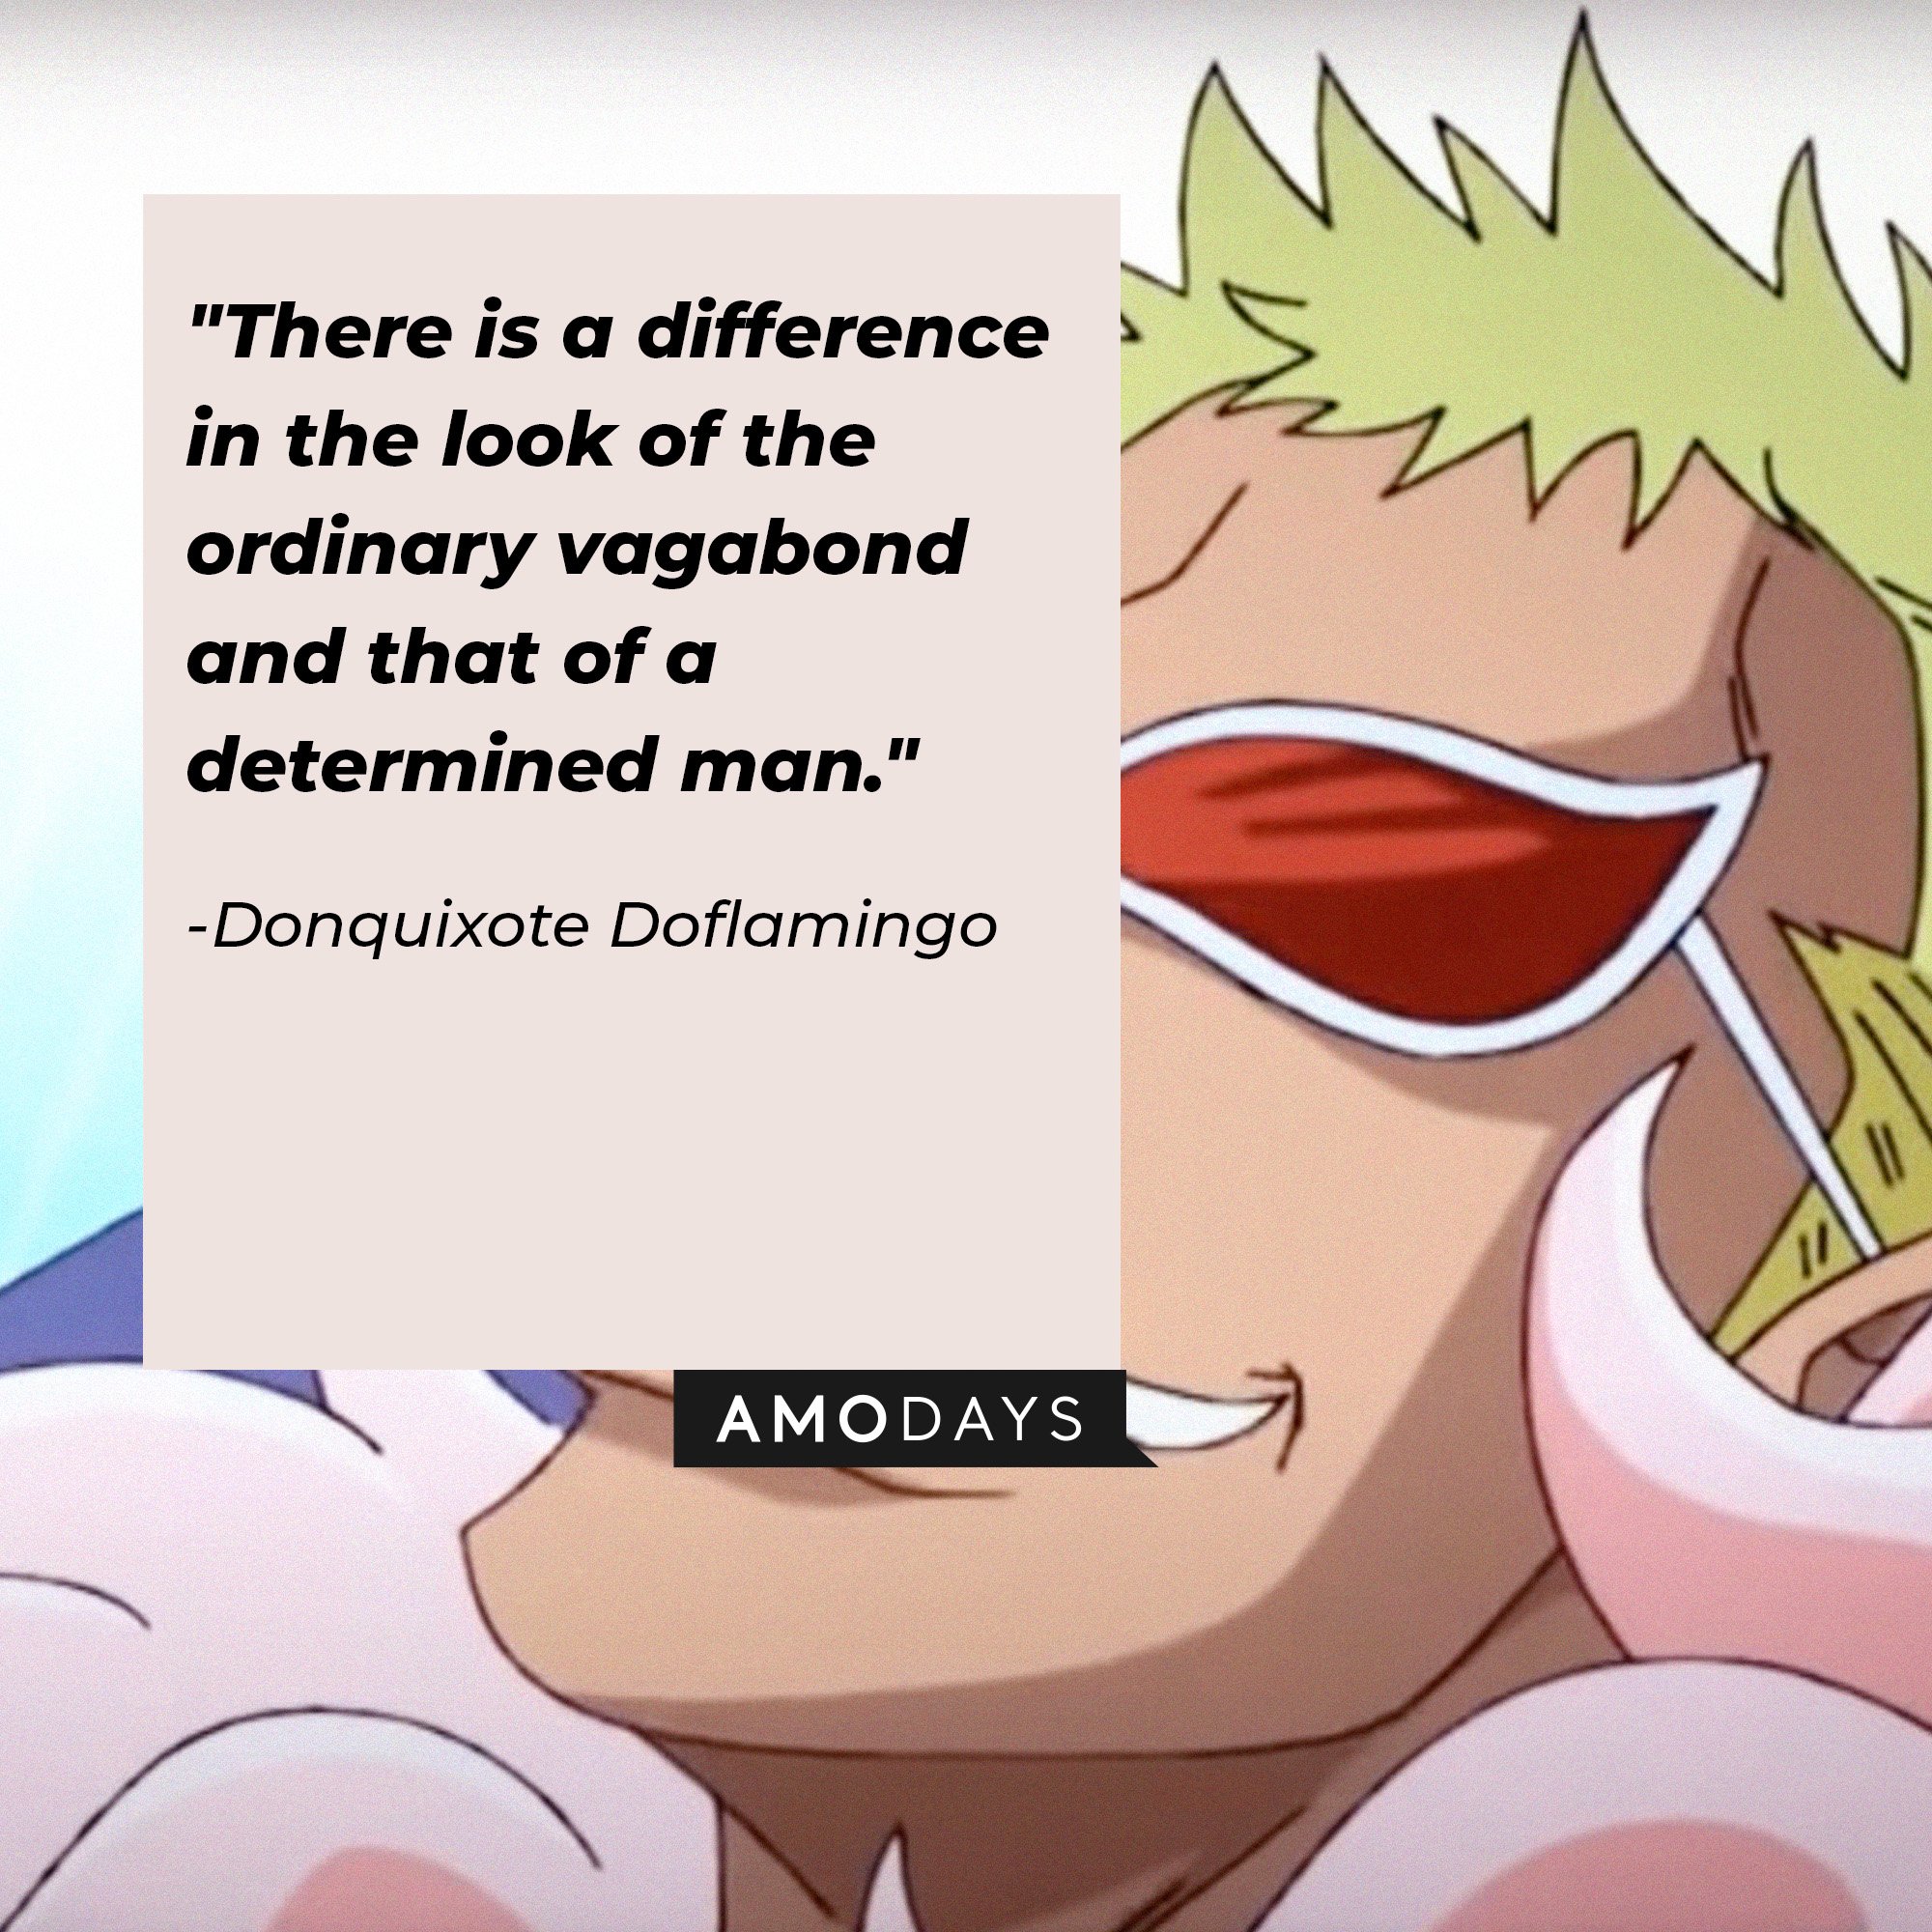  Donquixote Doflamingo’s quote: "There is a difference in the look of the ordinary vagabond and that of a determined man." | Image: AmoDays